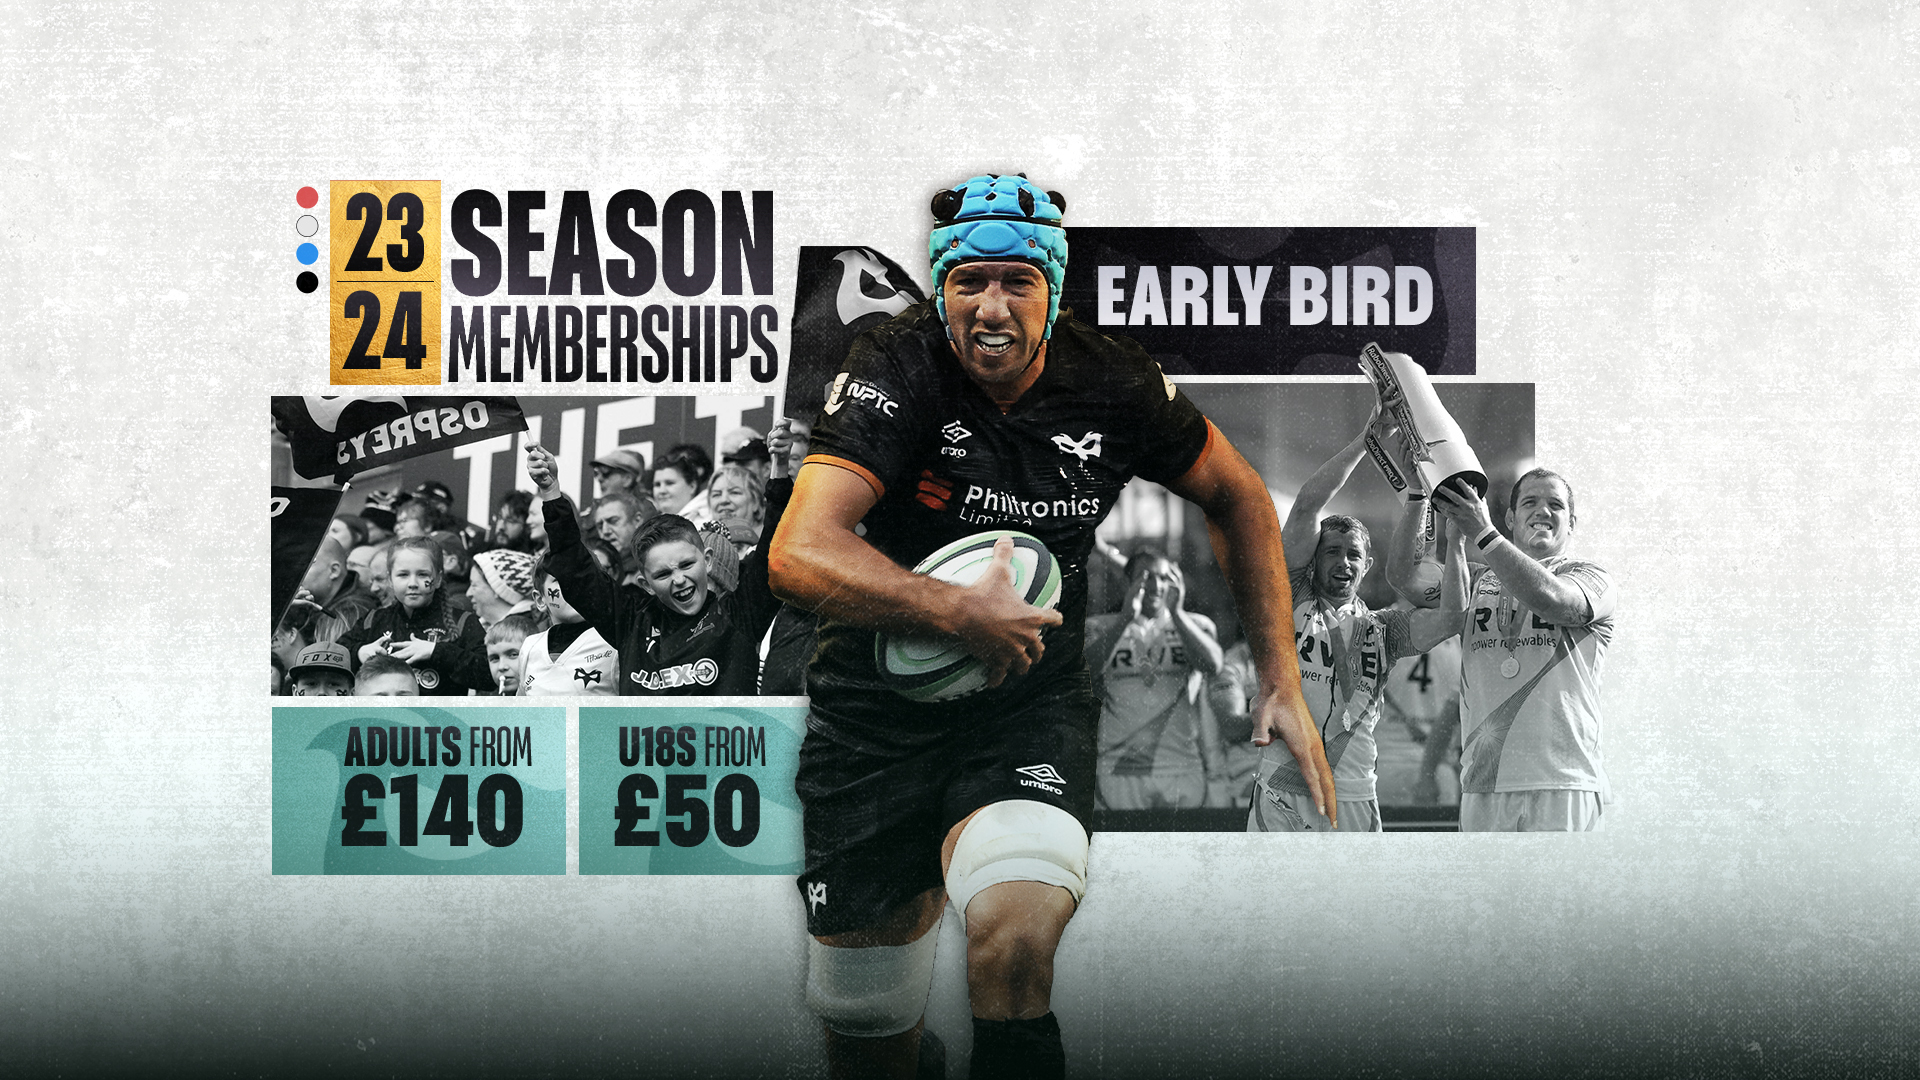 Justin Tipuric bursts through. 2023/2024 season memberships on sale now. From £140 for adults, under 18s from £50.